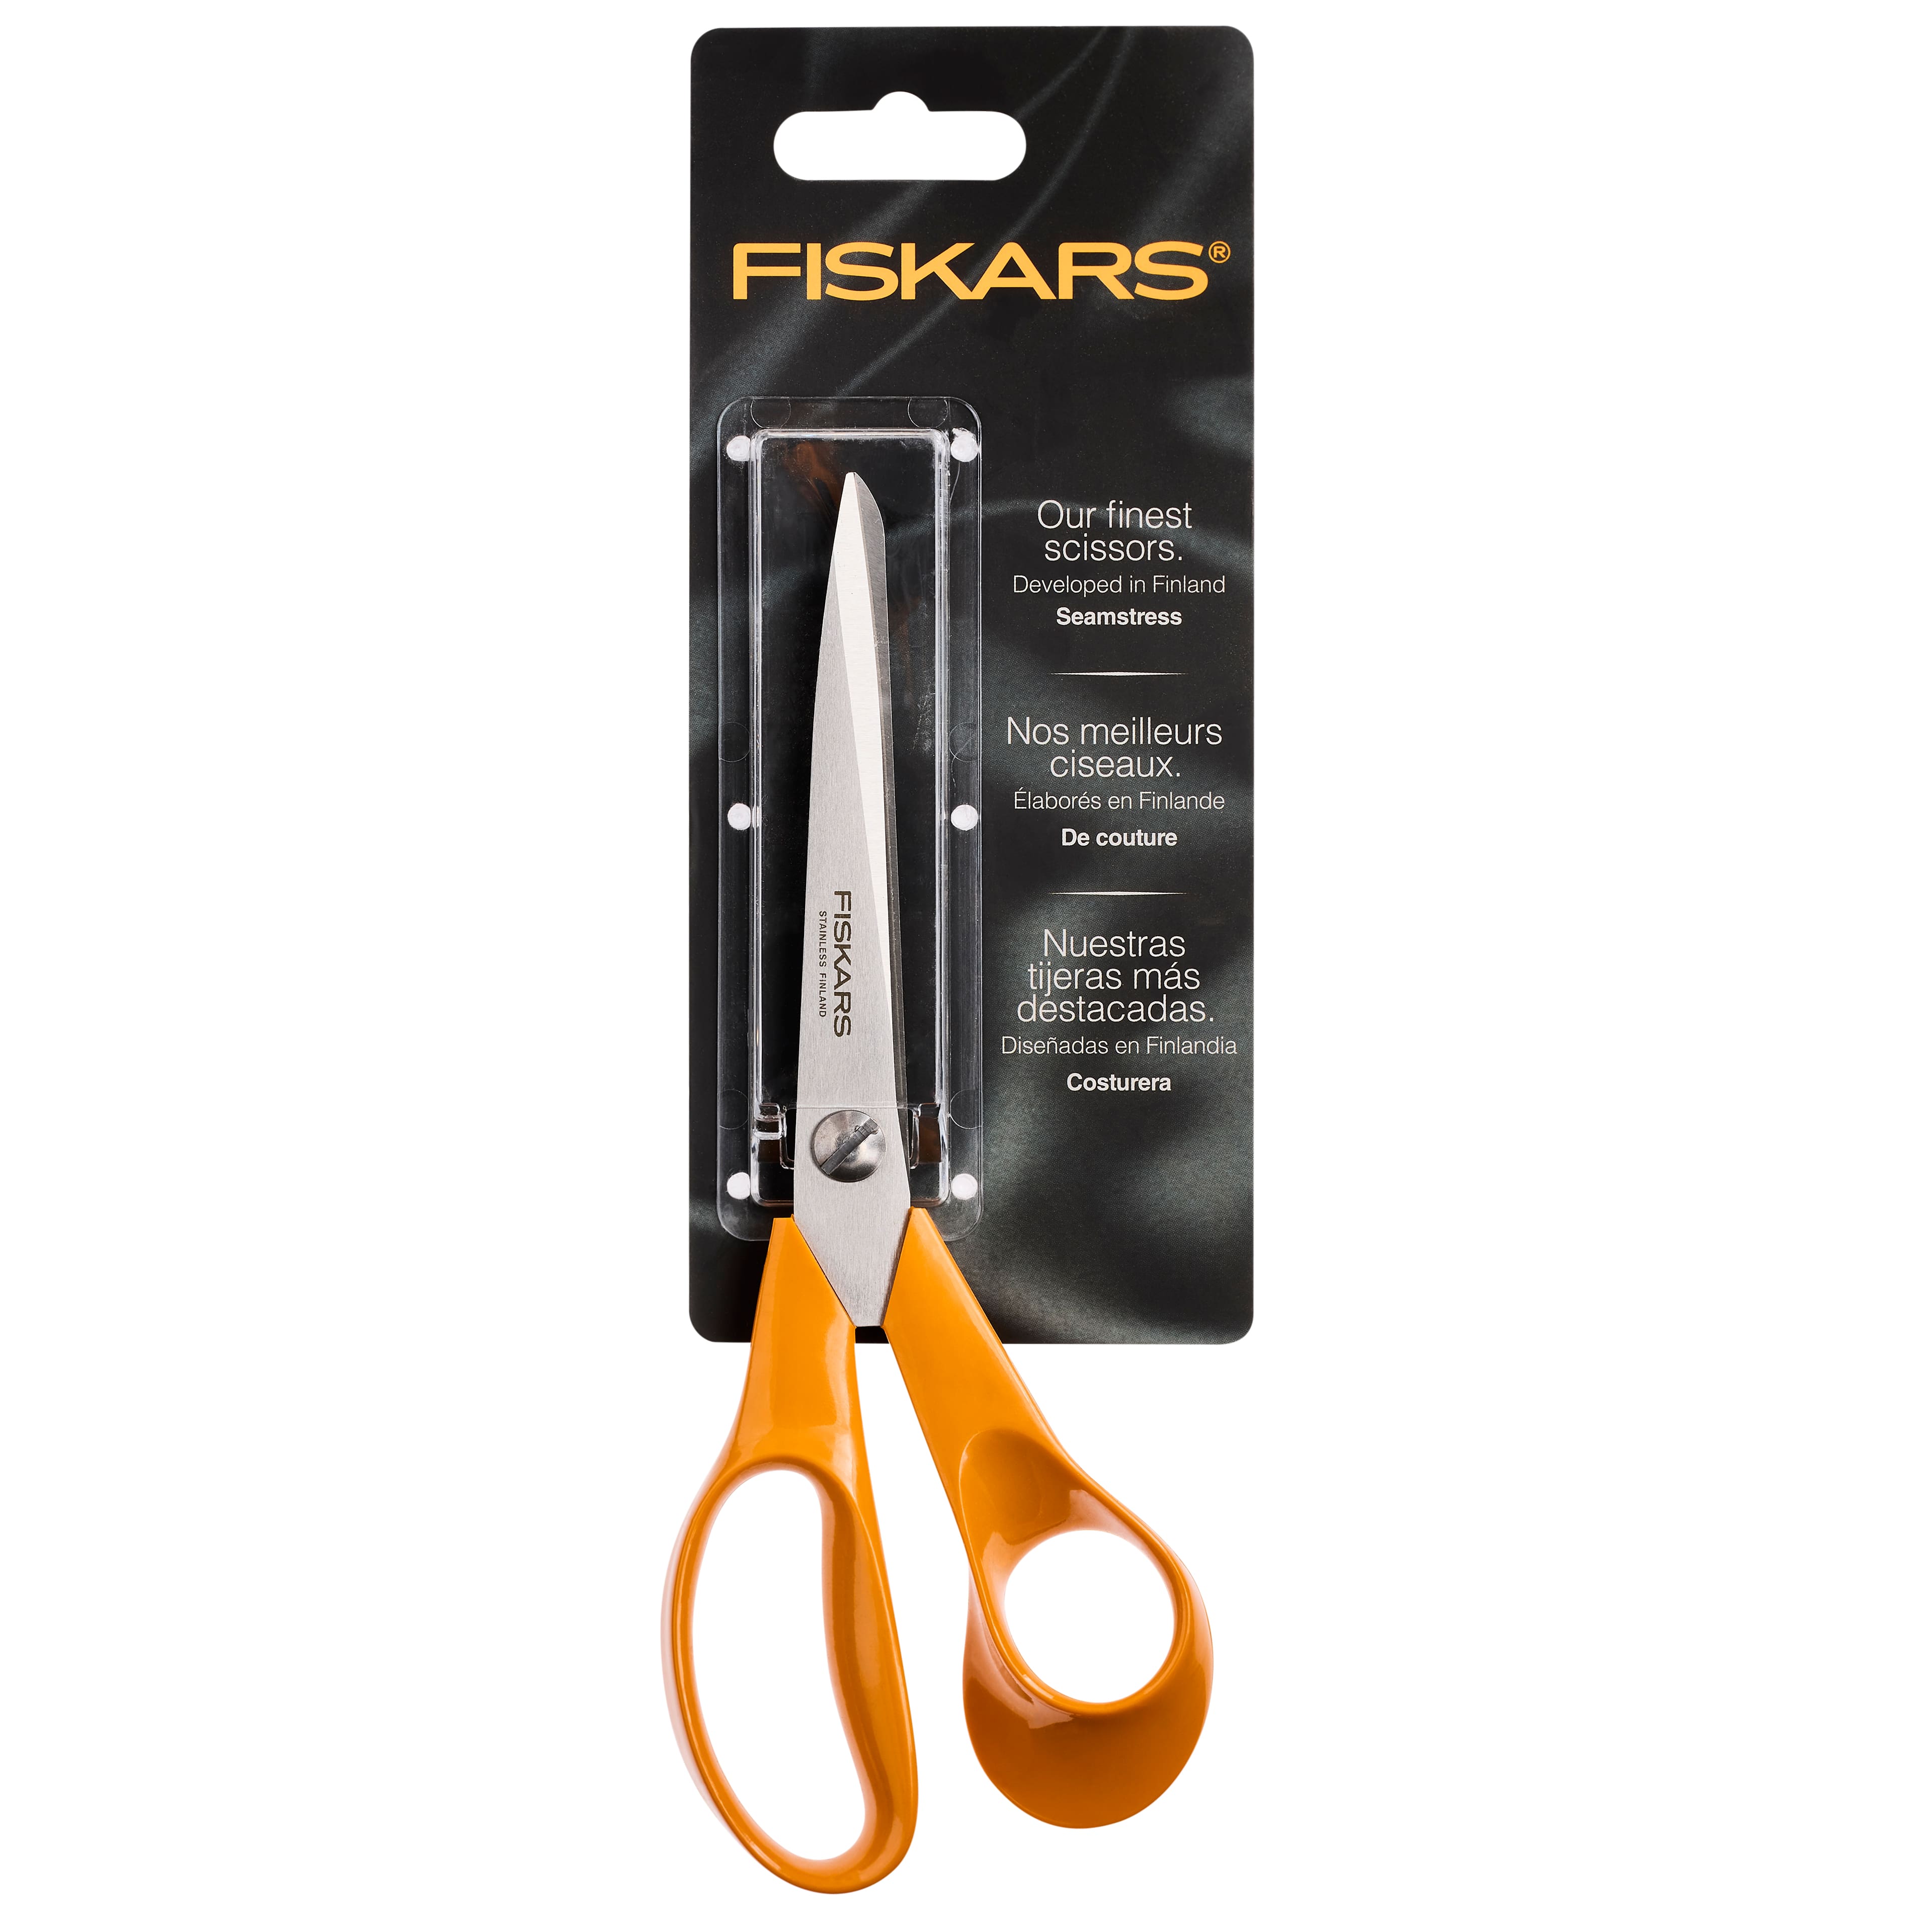 Fiscars Poultry Shear Stainless Steel Finland. Scissors 